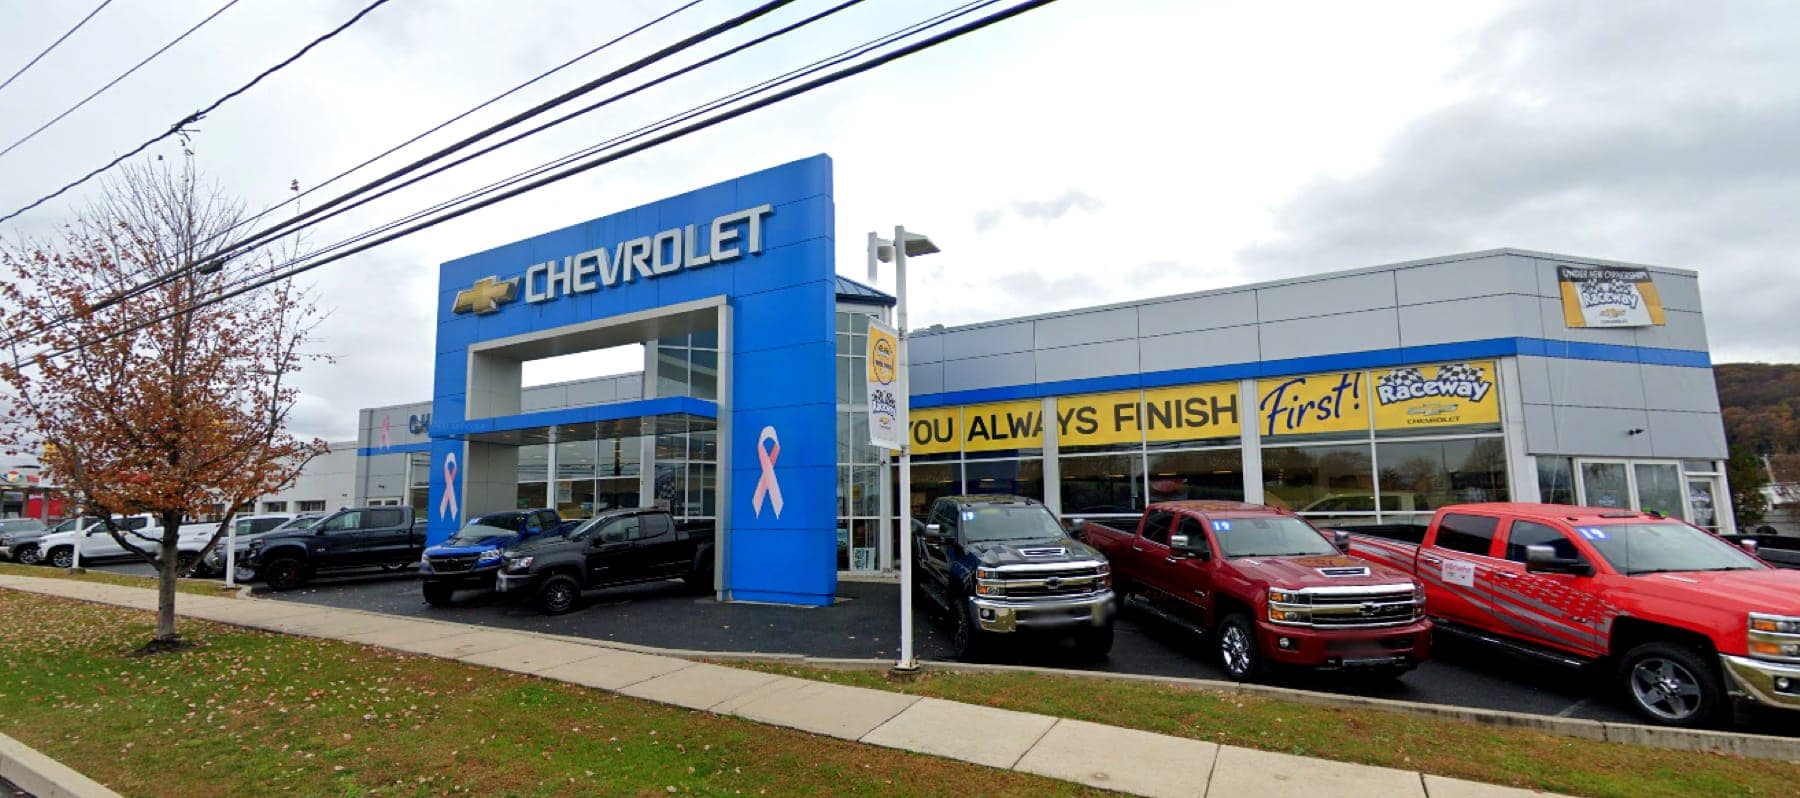 Outside view of the front of the dealership